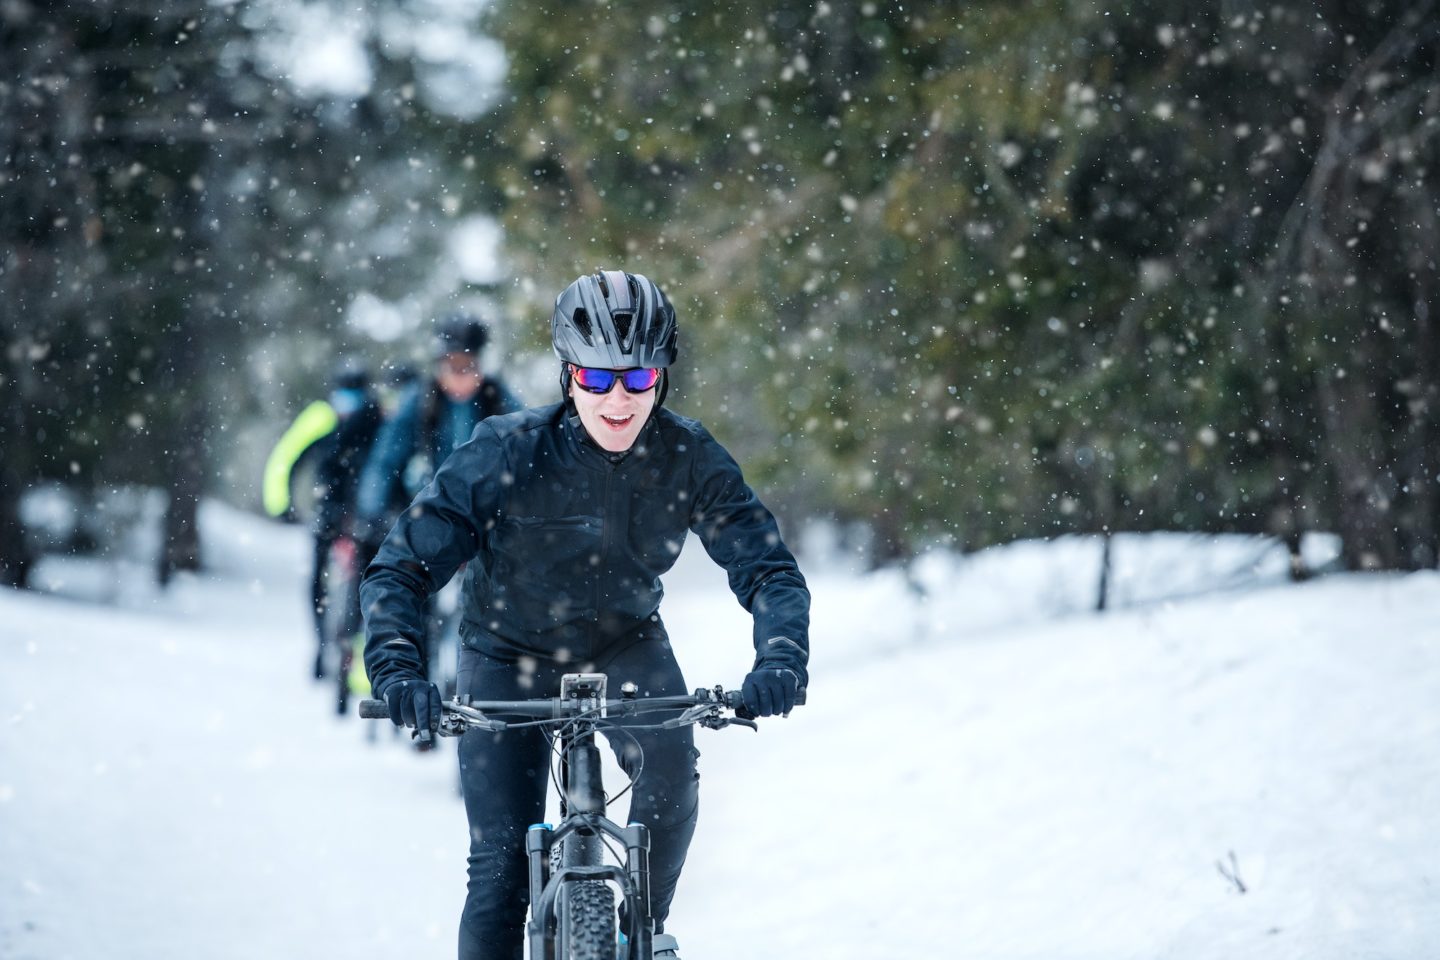 Group of mountain bikers riding on road outdoors in winter.